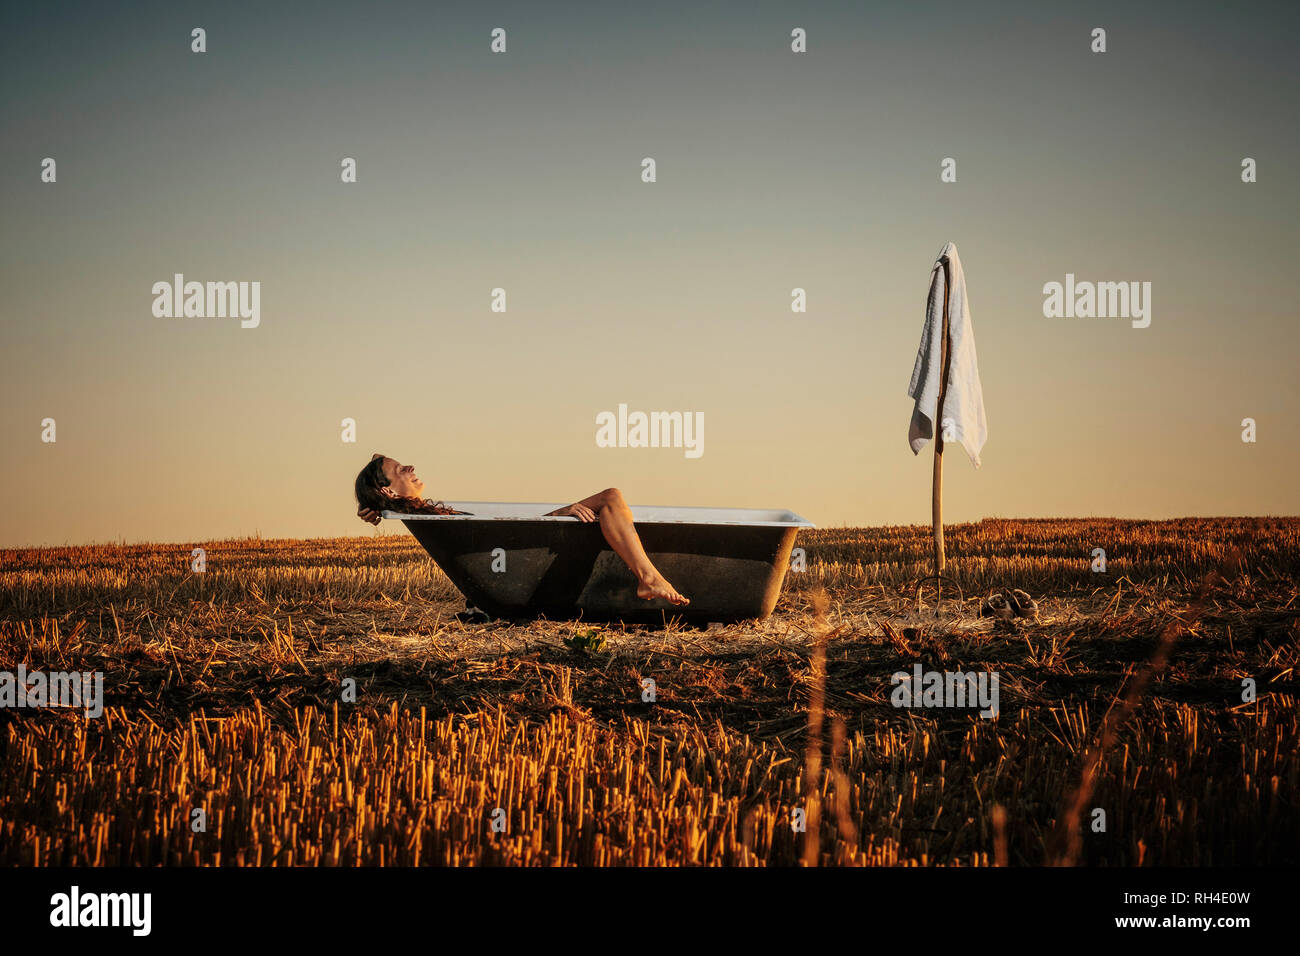 Woman relaxing in bathtub in rural field Banque D'Images